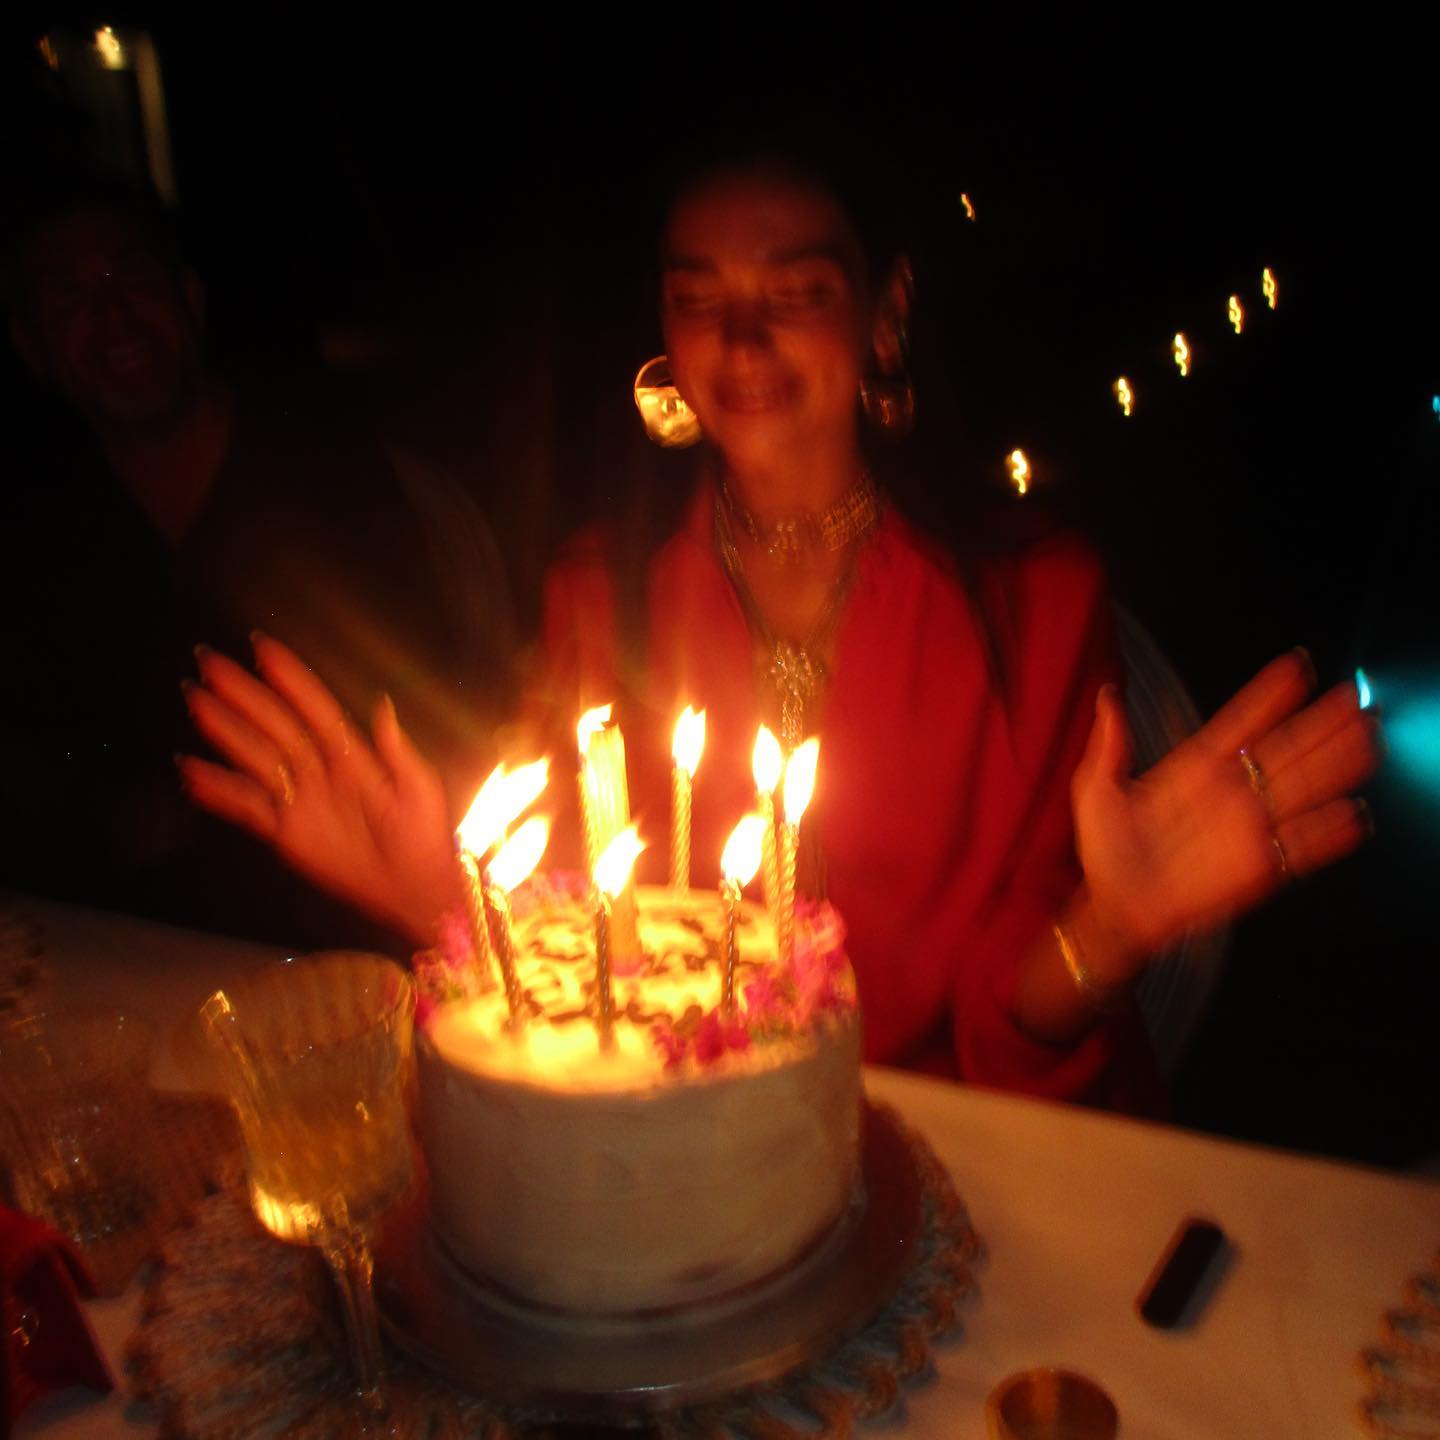 She beamed as the candles on her cake were lit